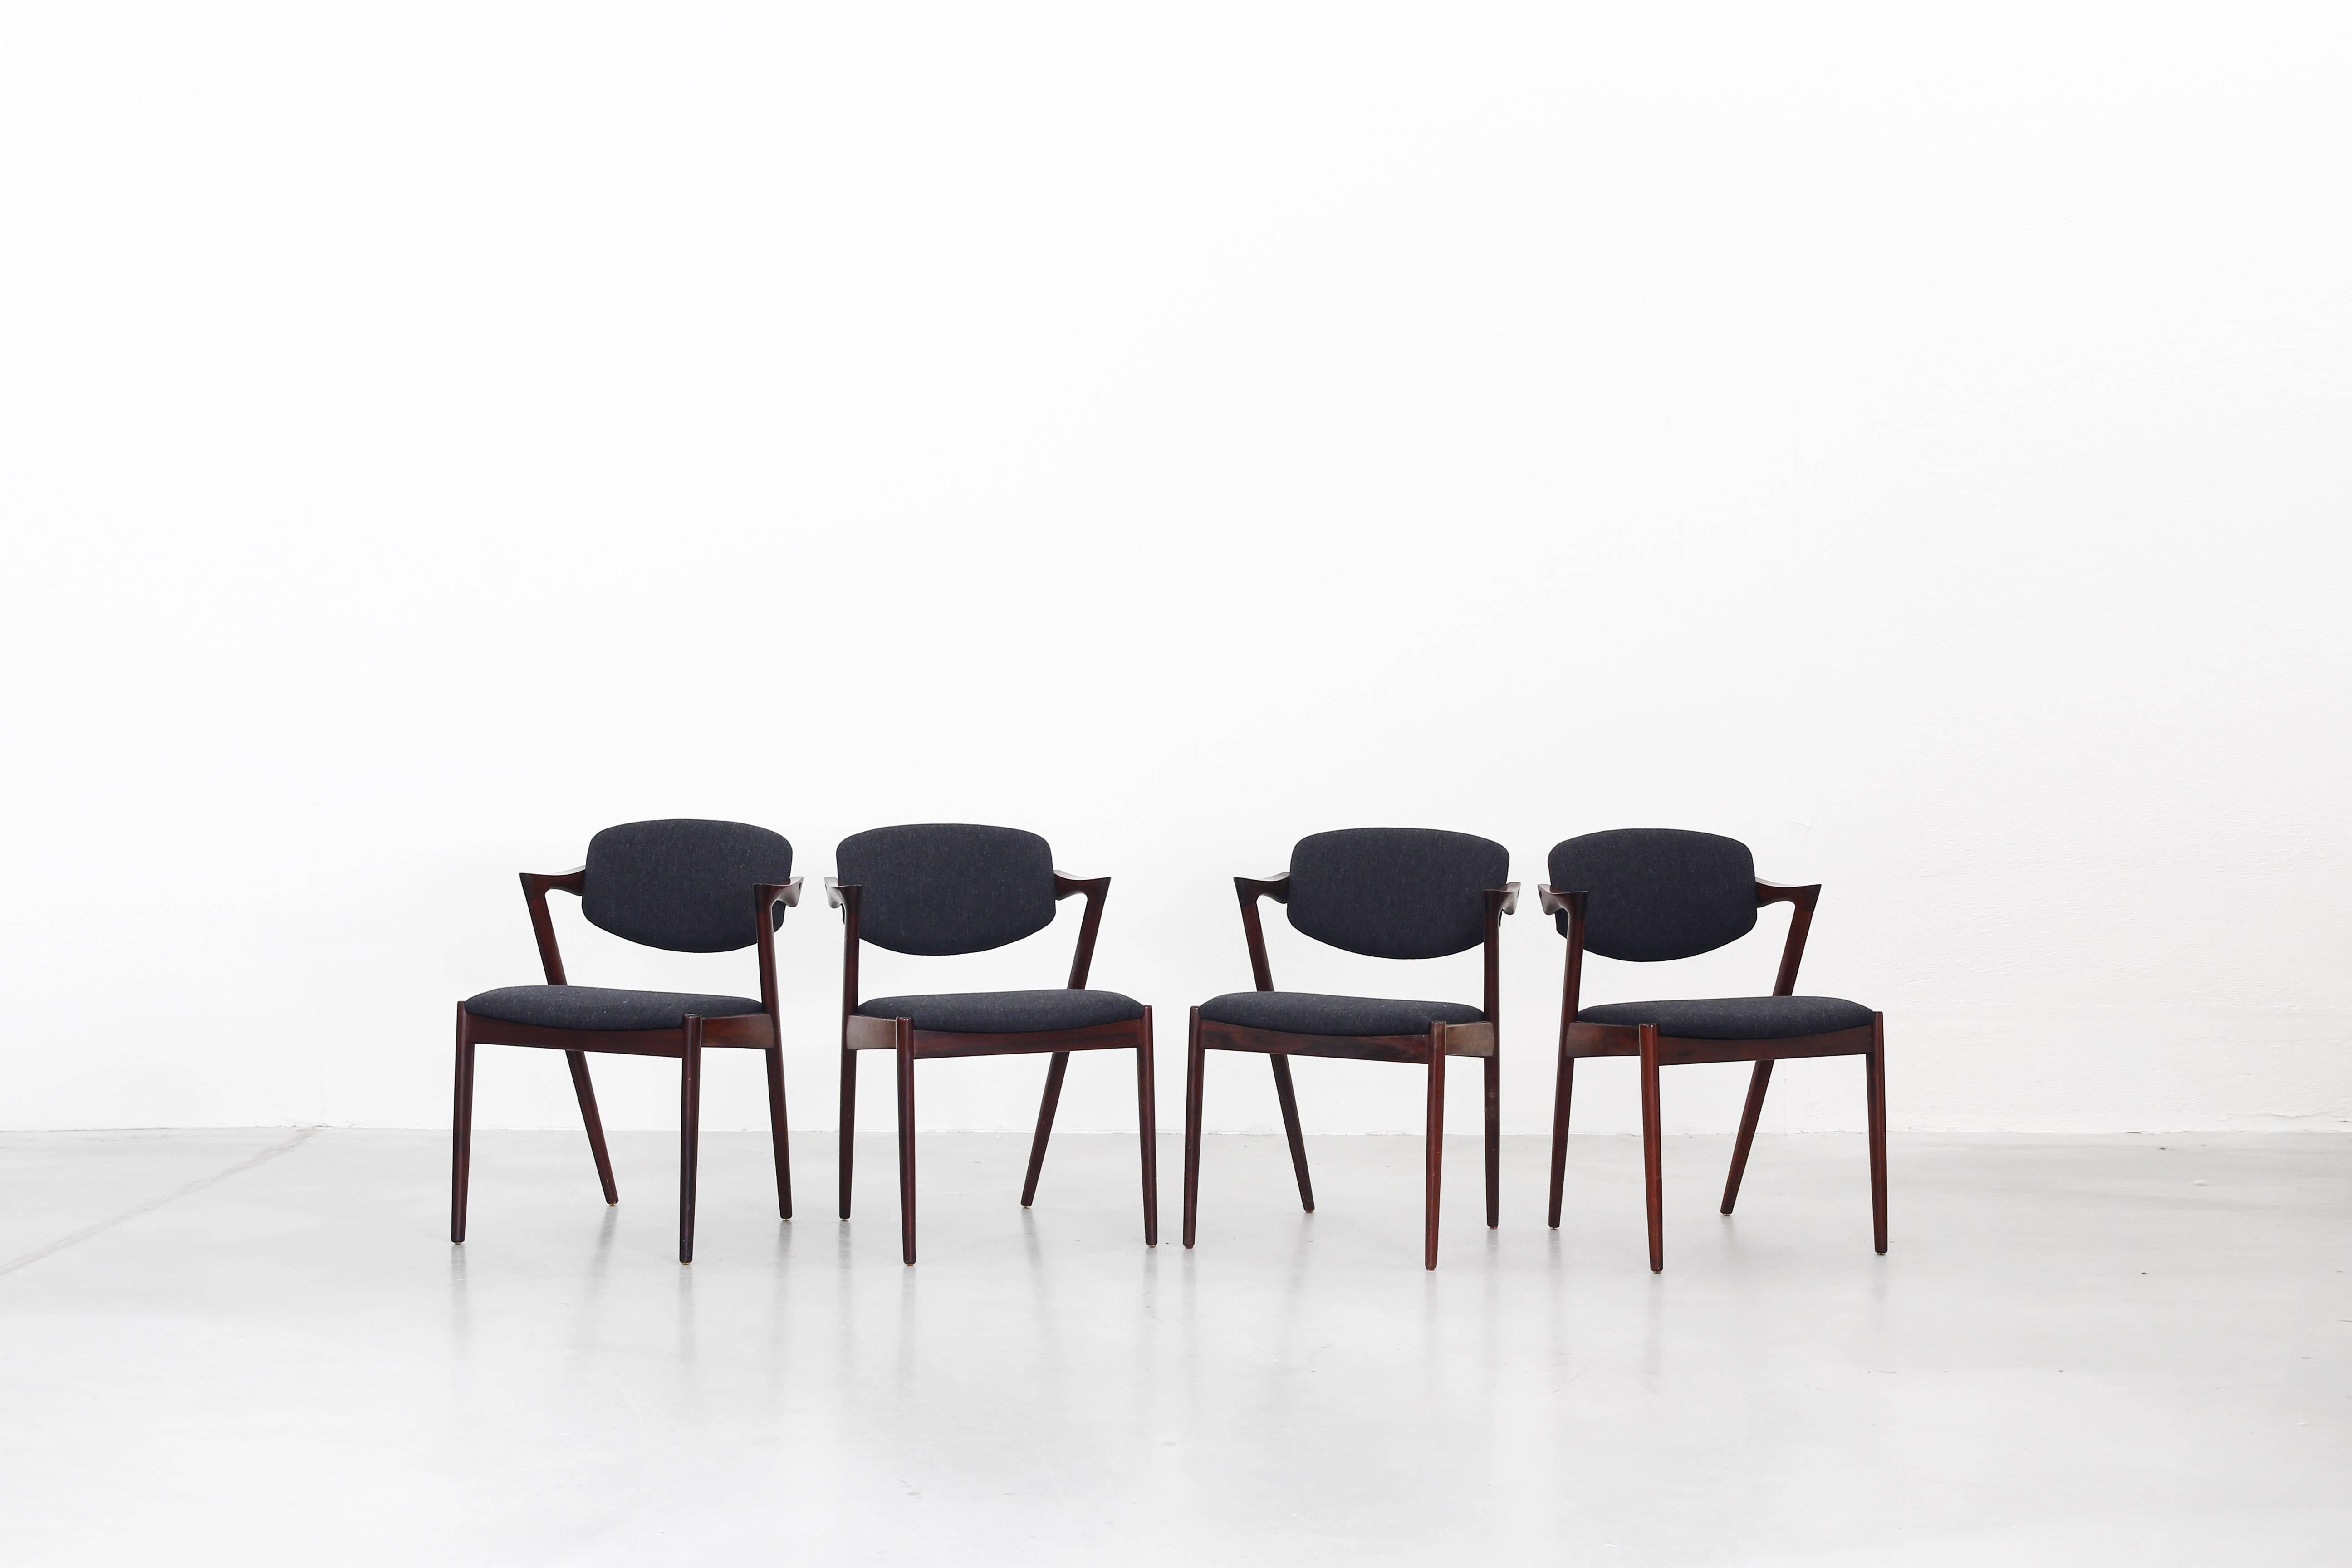 Very beautiful set of eight dining chairs designed by Kai Kristiansen and produced by V. Schou Andersen, Denmark in 1964. The chairs are in a very good condition, all of them were newly reupholstered with a high quality fabric in dark grey by